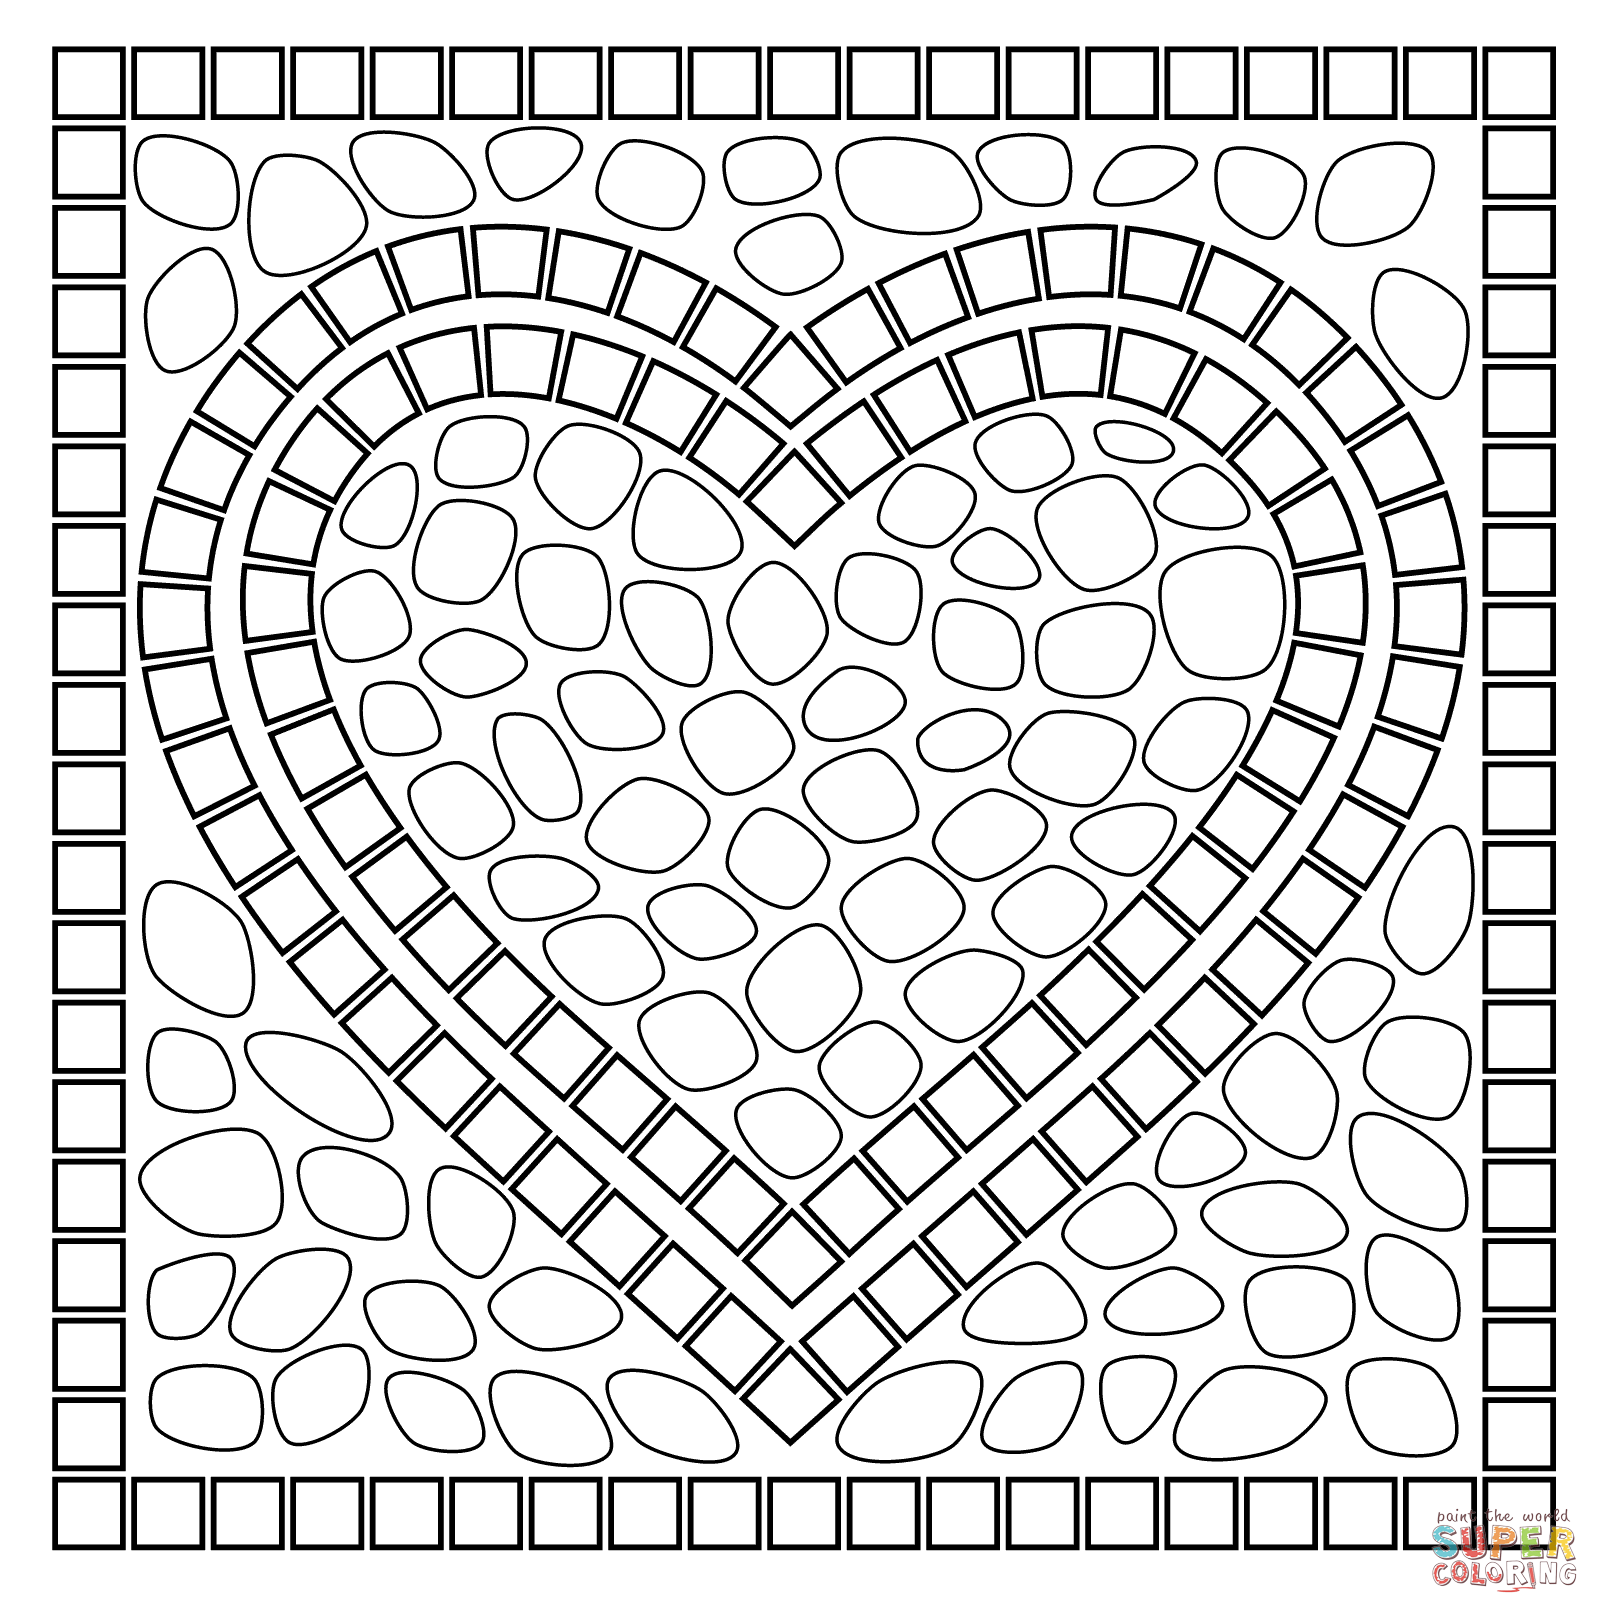 Free Roman Mosaic Coloring Pages, Download Free Roman Mosaic Coloring